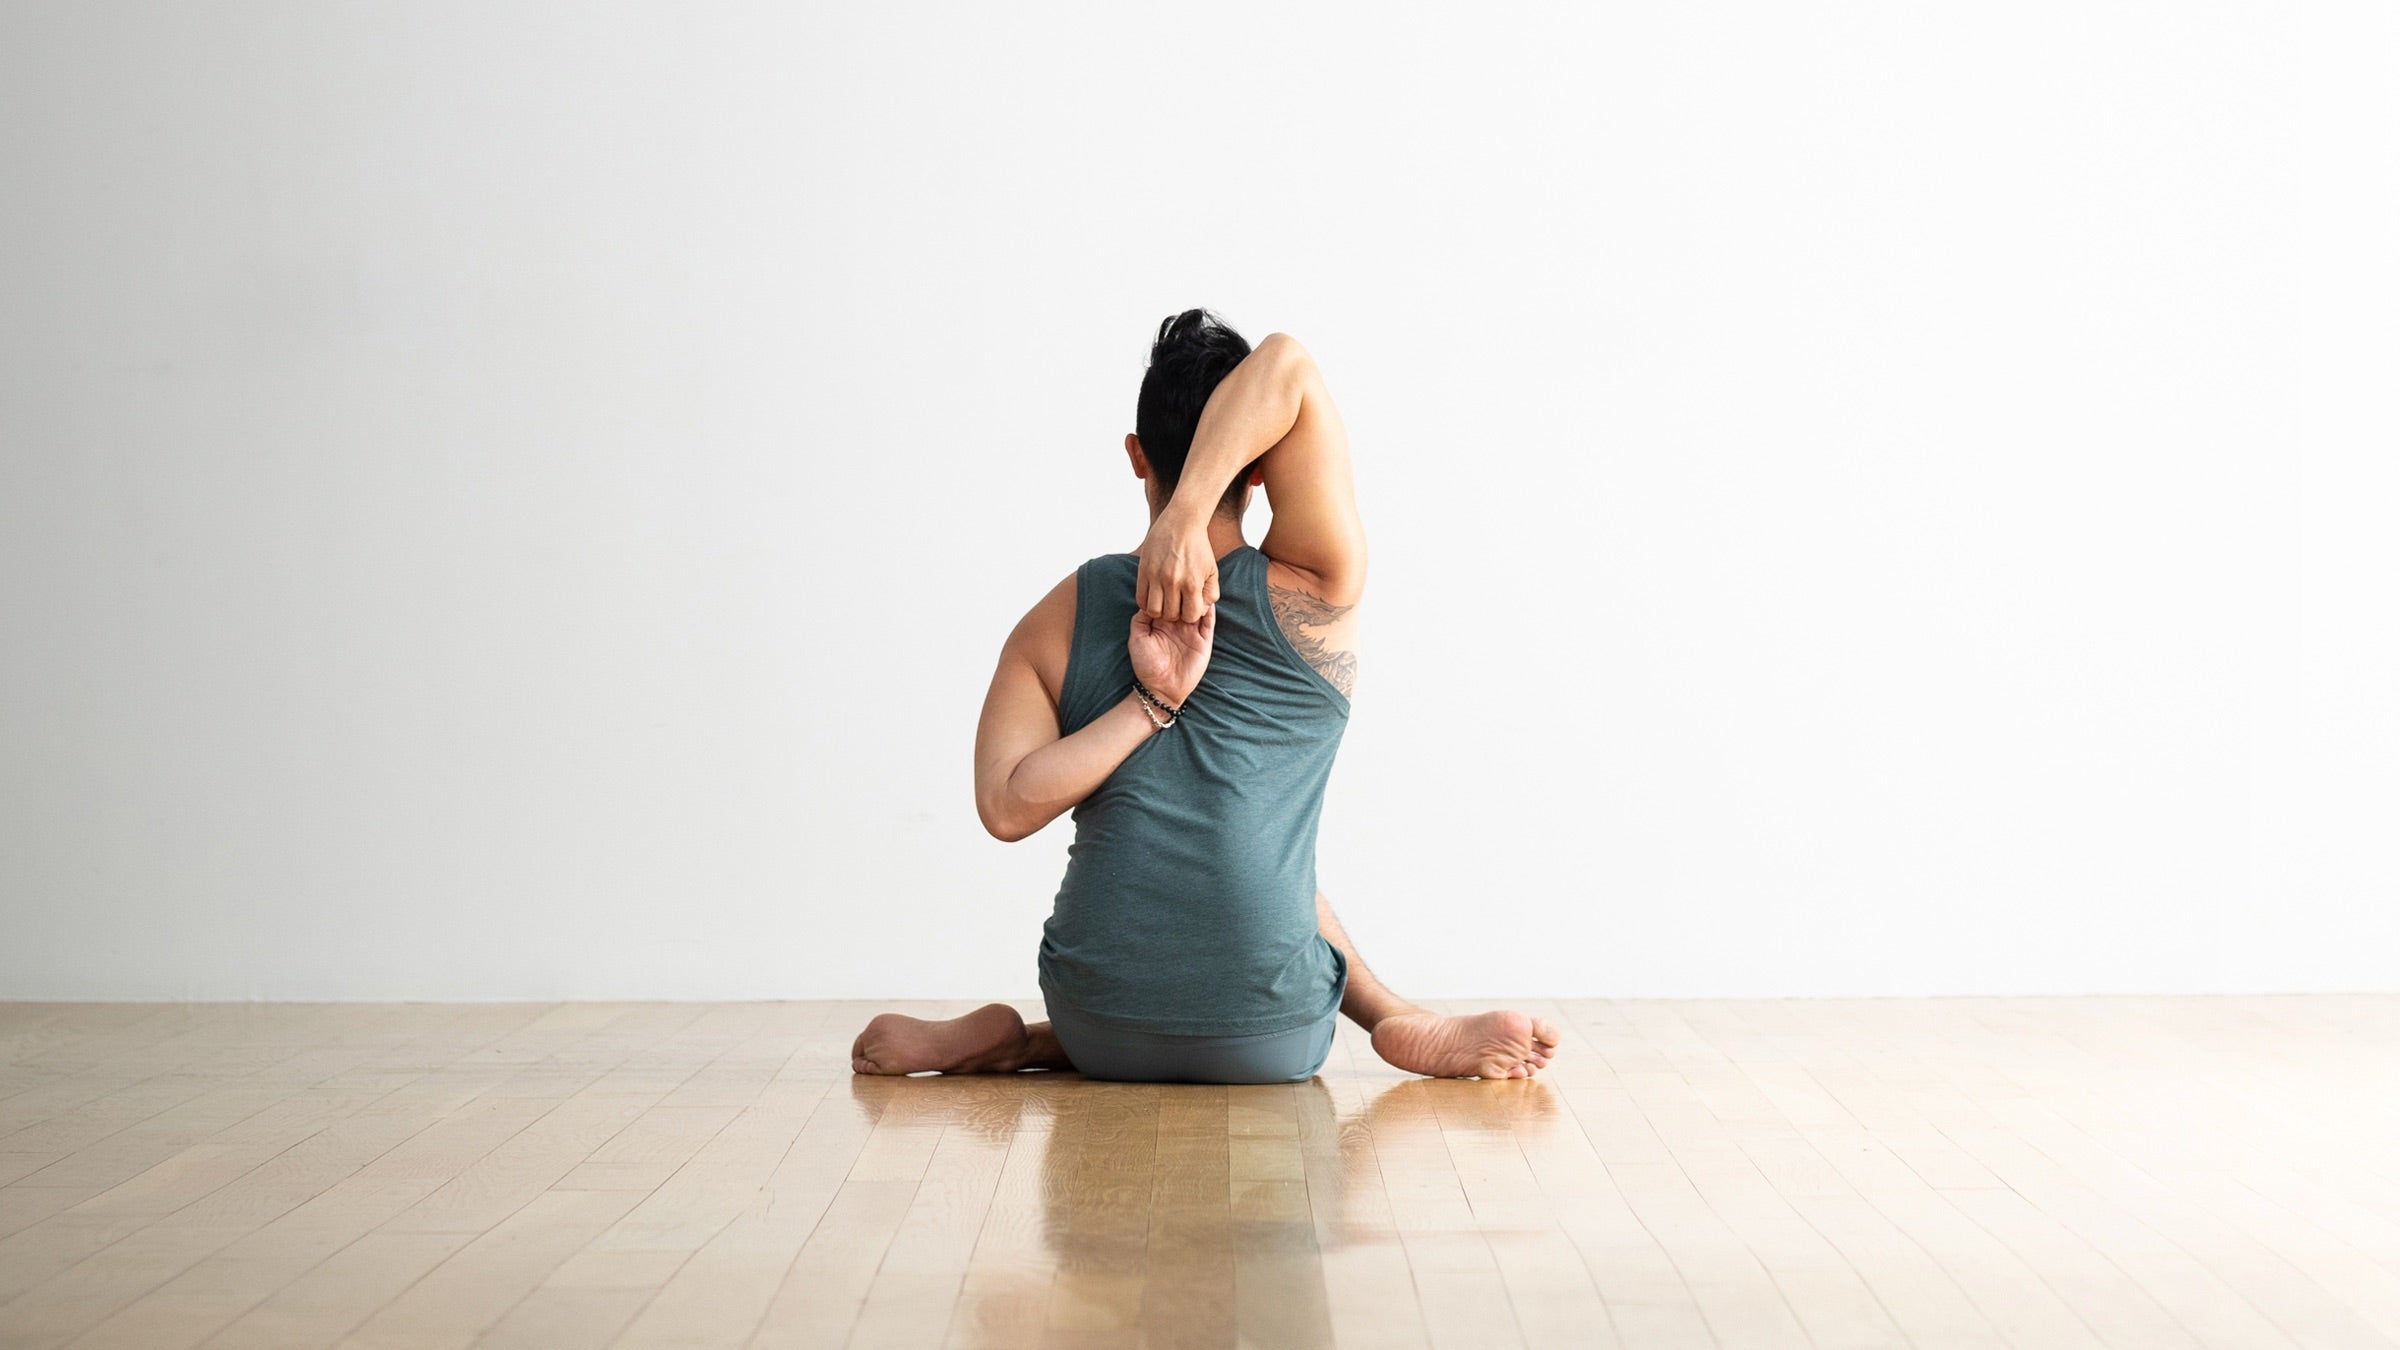 7 Yoga Poses to Relieve Neck and Shoulder Pain - Yoga Journal